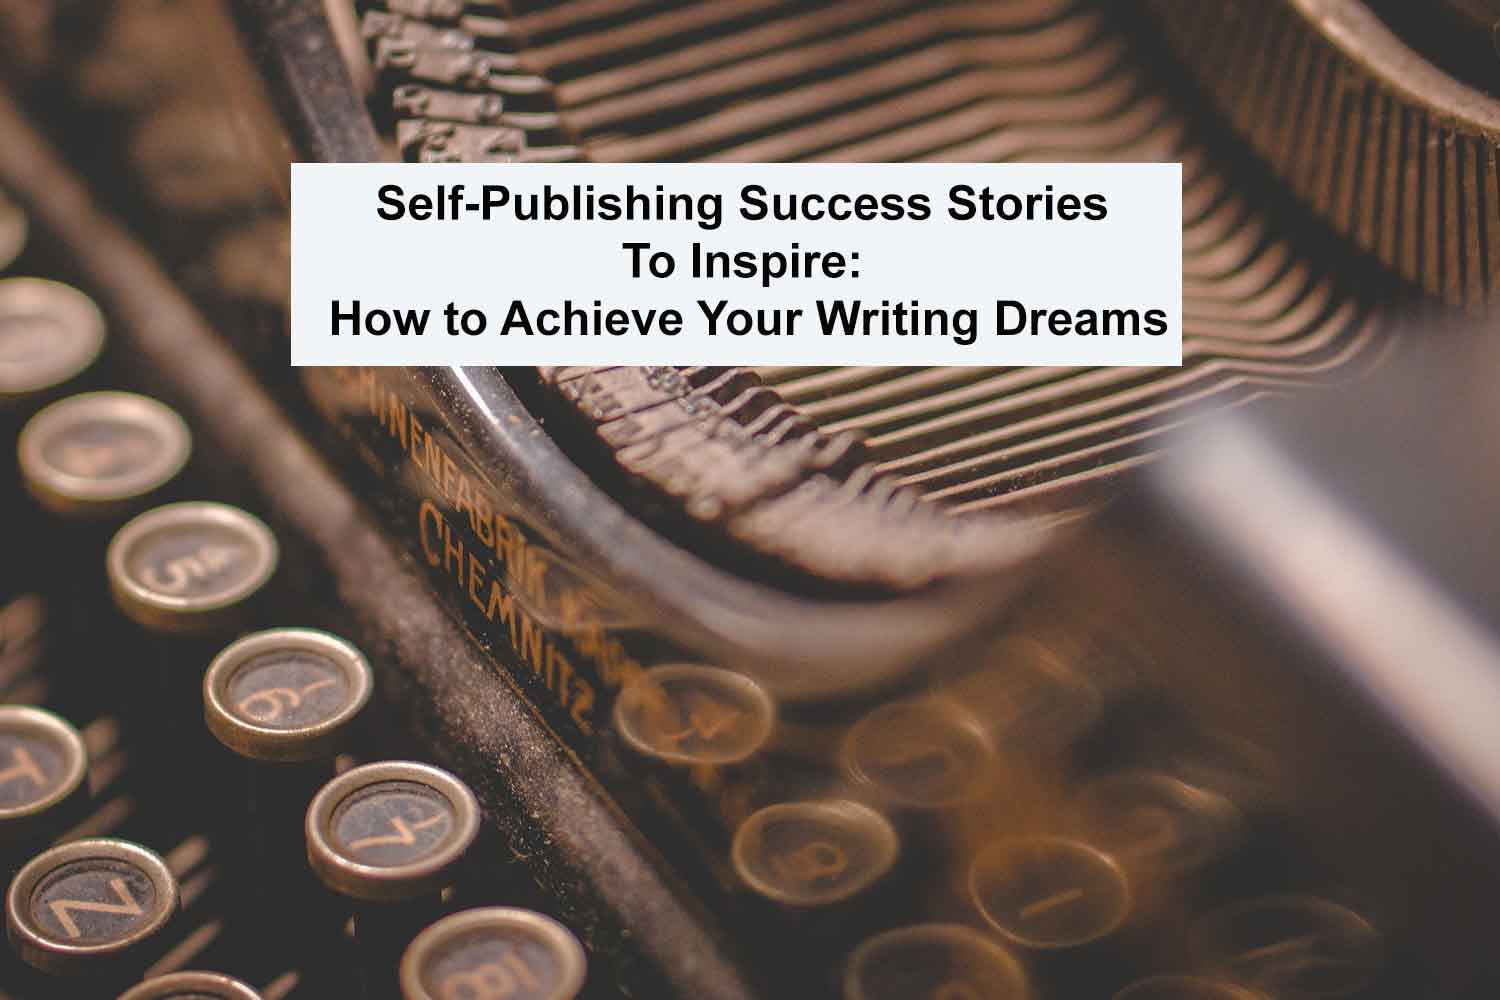 Self-Publishing Success Stories To Inspire How to Achieve Your Writing Dreams